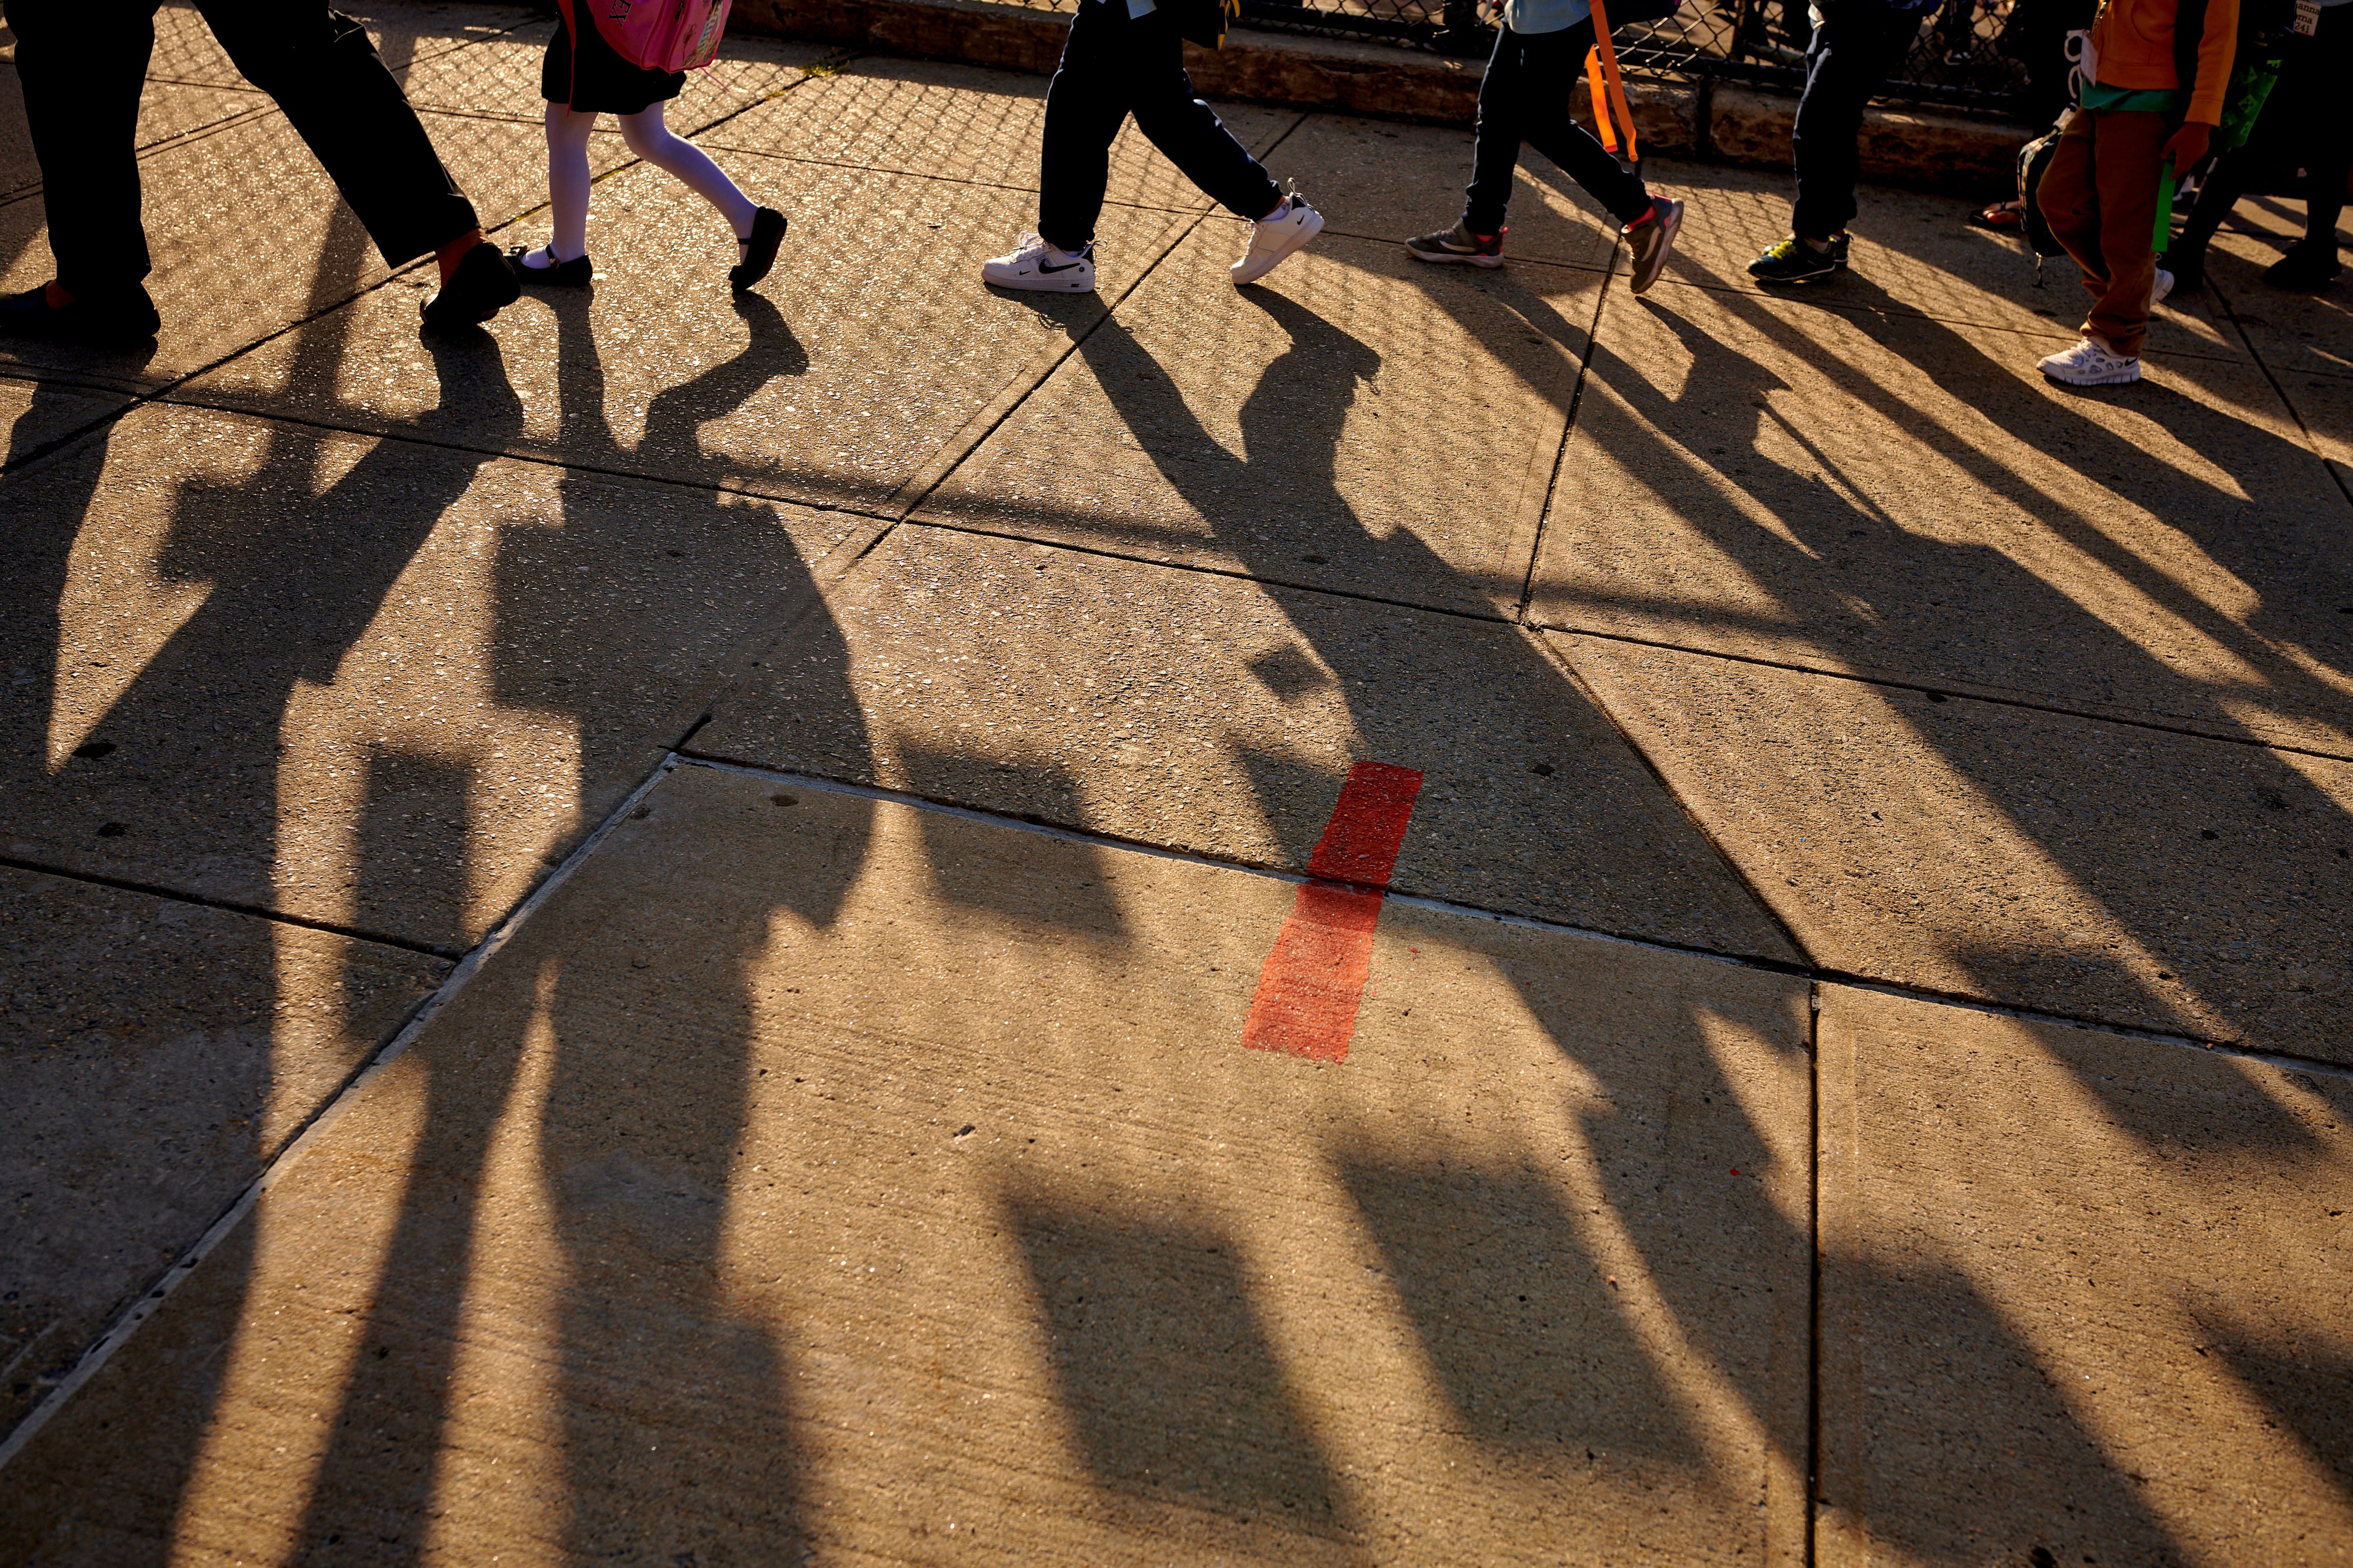 Young students cast long shadows on the sidewalk as they head in for their first day of school.